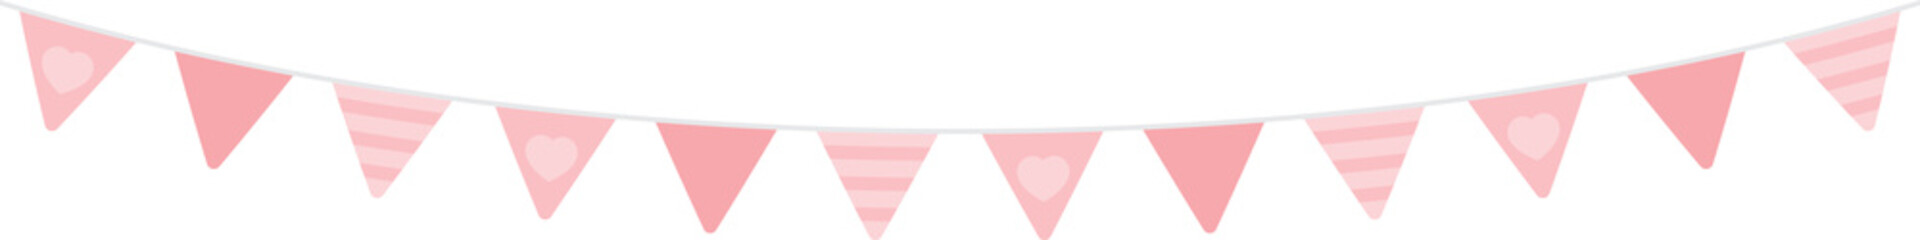 Cute pink triangle party bunting. Baby and kids party decoration. Flat design illustration.	